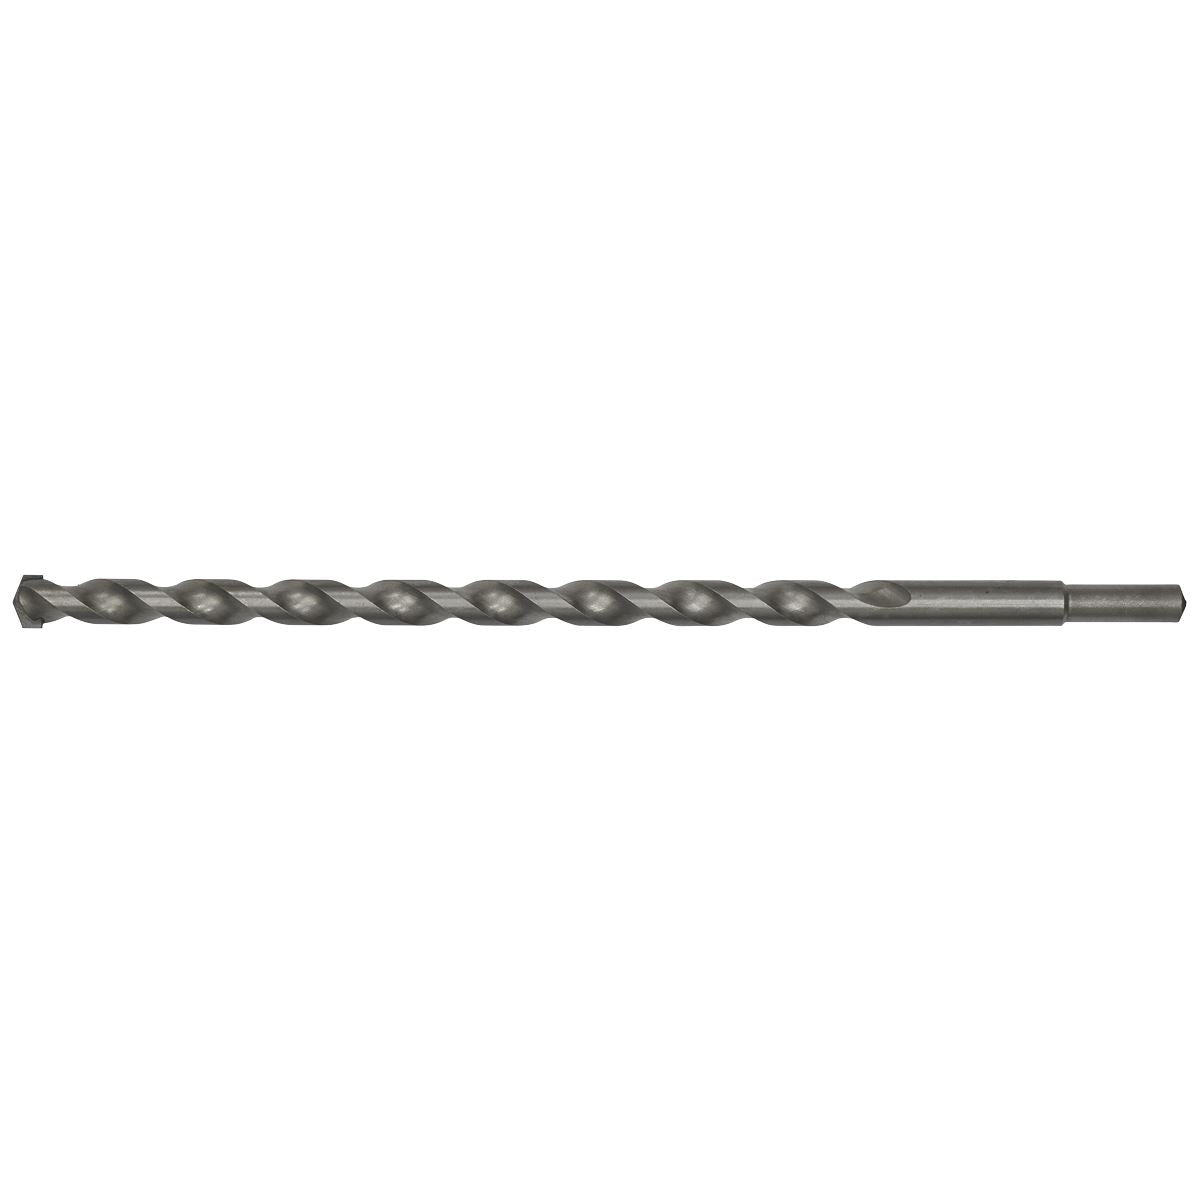 Worksafe by Sealey Straight Shank Rotary Impact Drill Bit Ø14 x 300mm